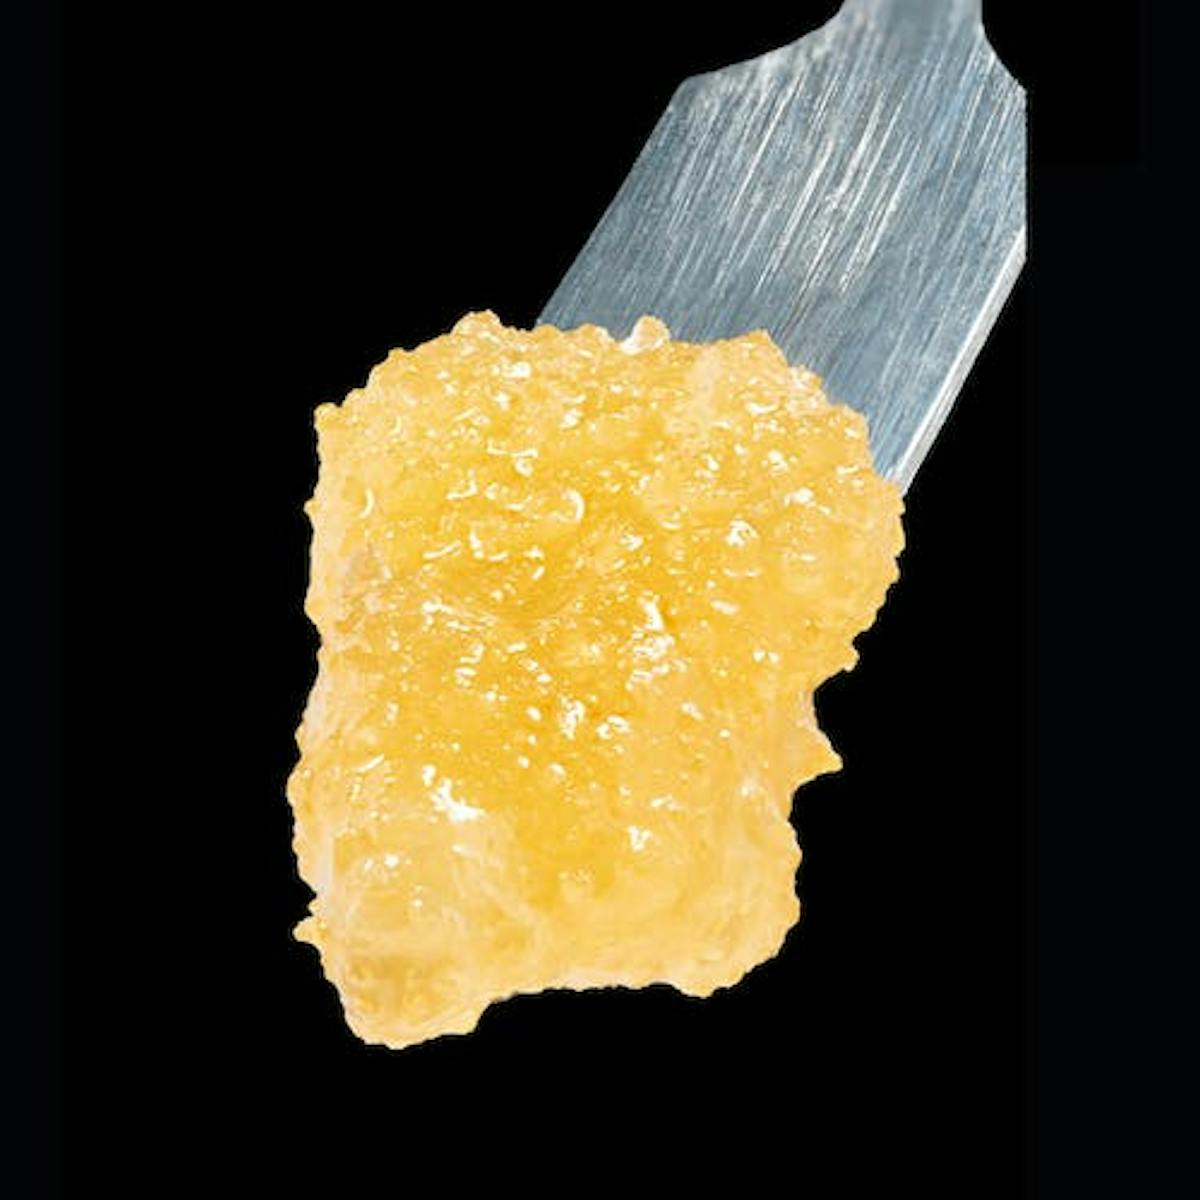 image of RB Live Resin